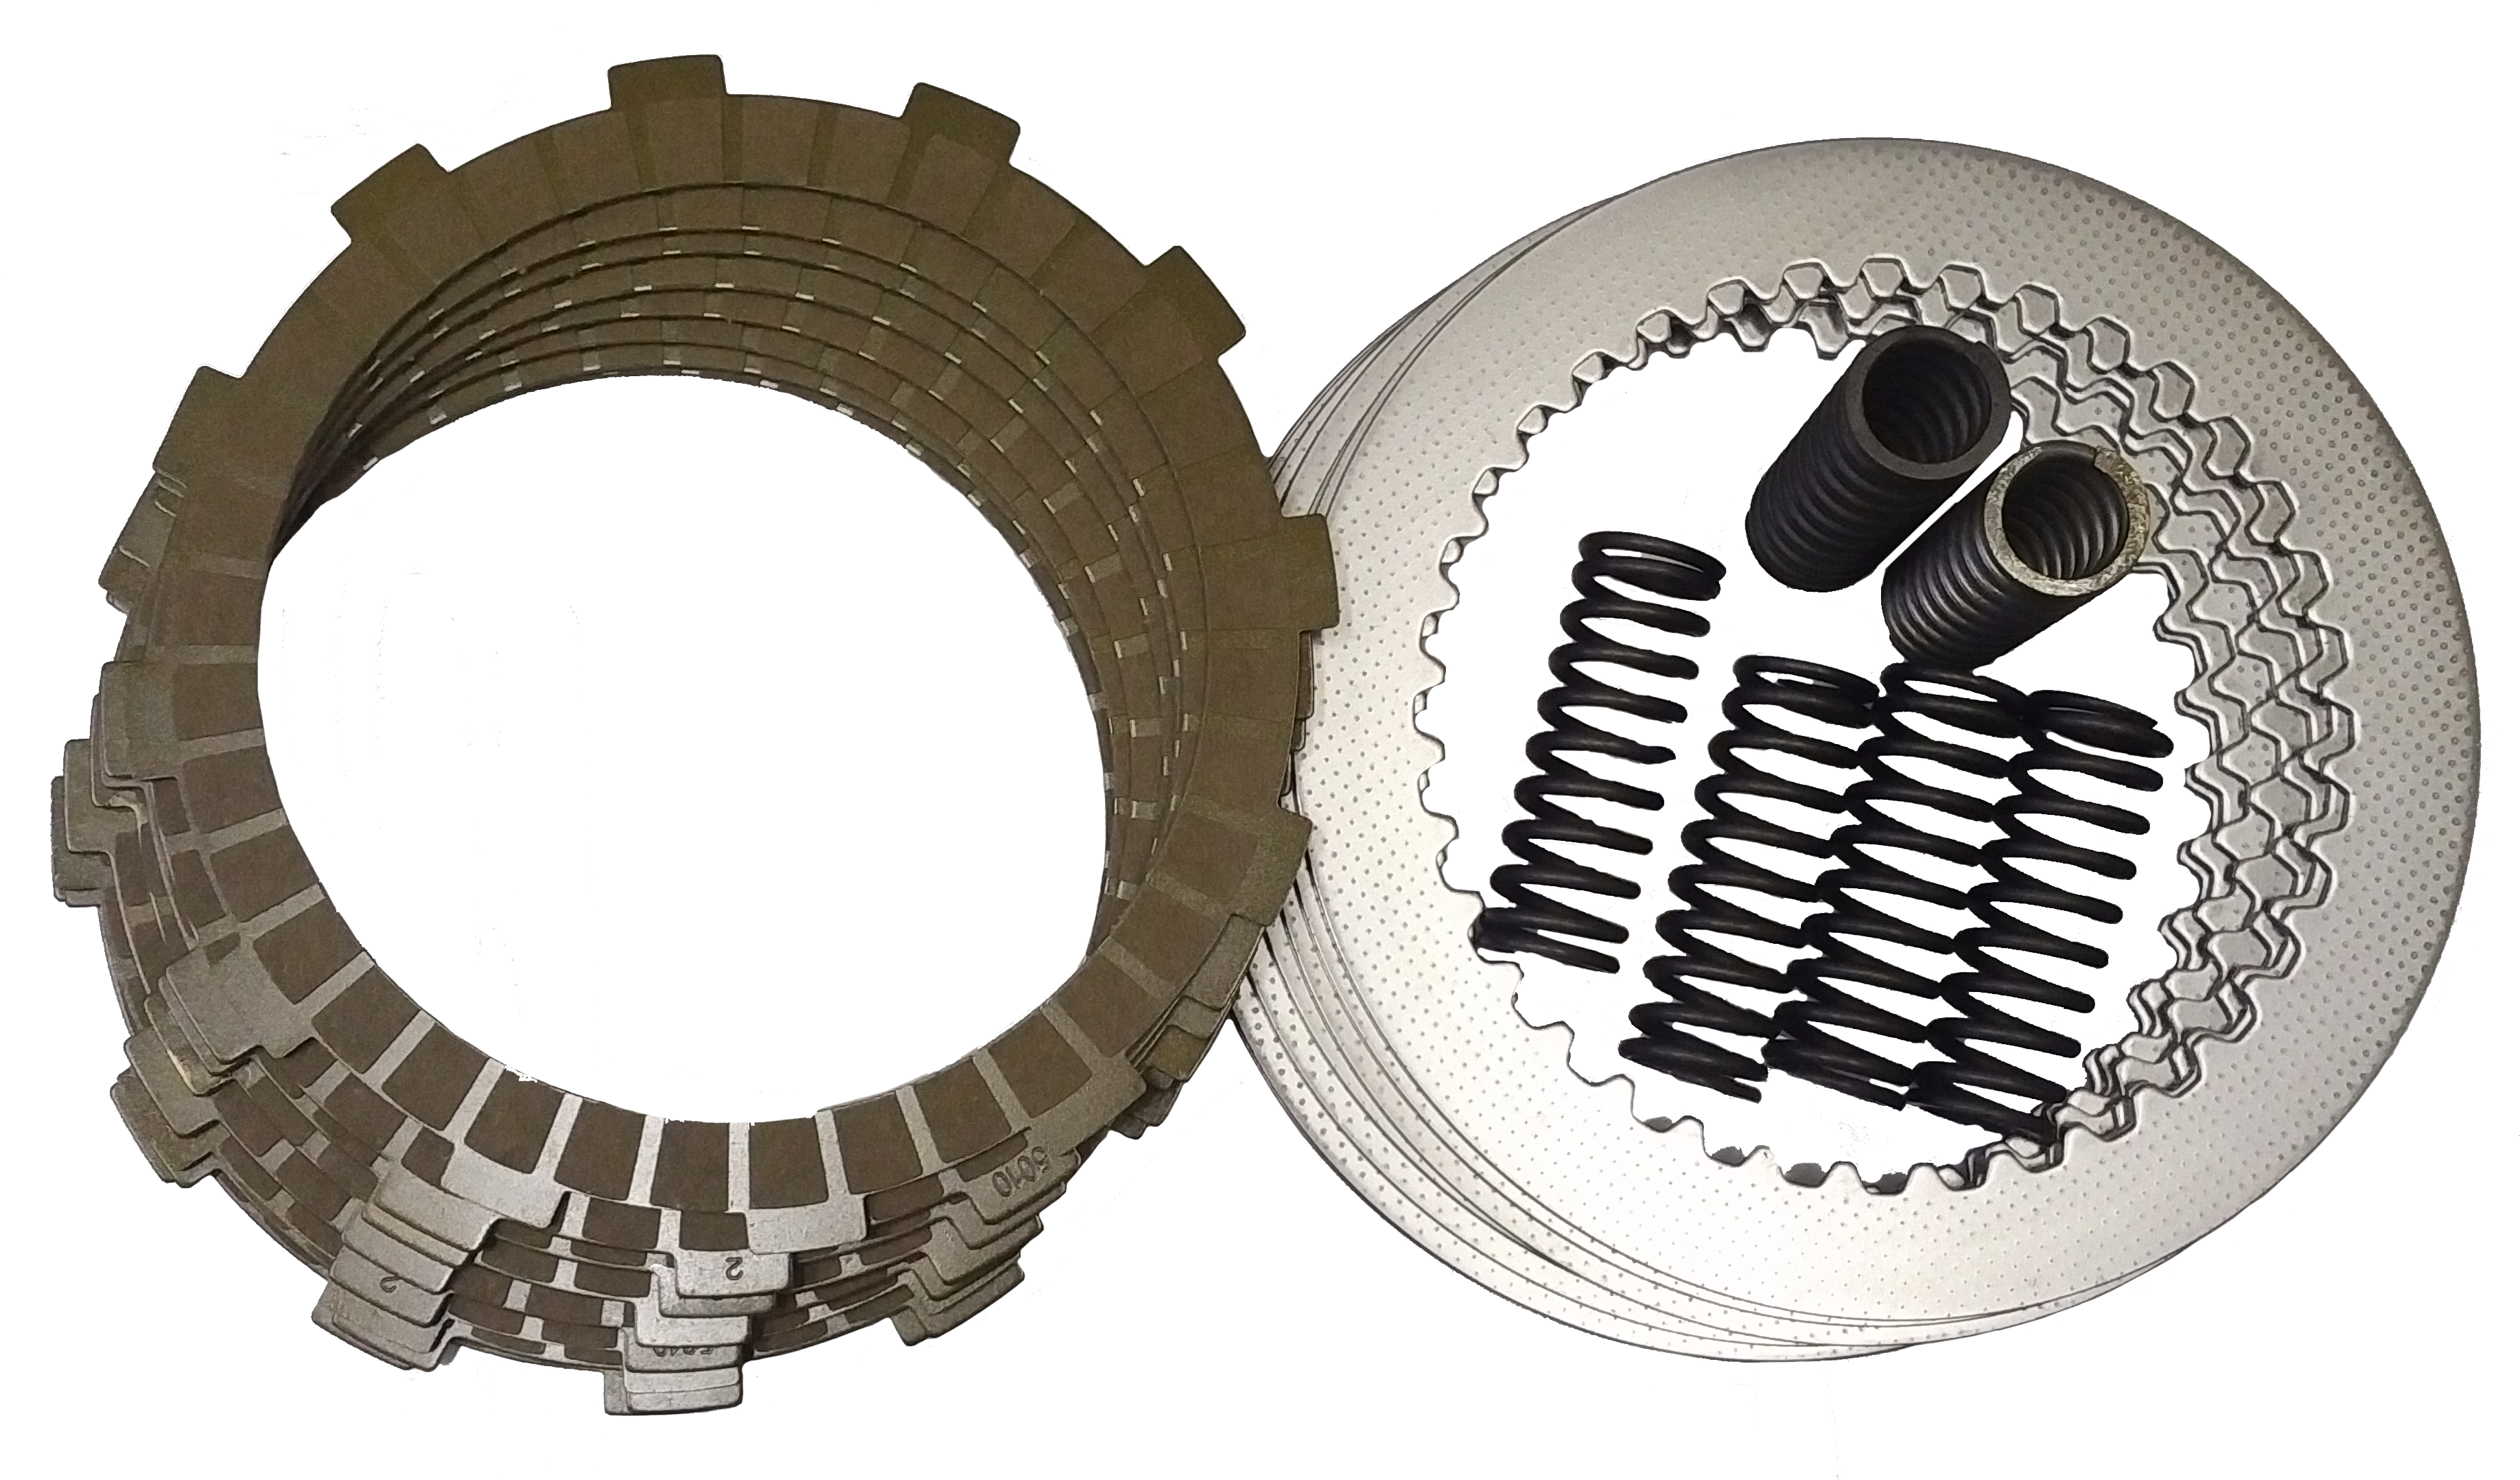 Complete Clutch Pack with Springs - HONDA CRF250